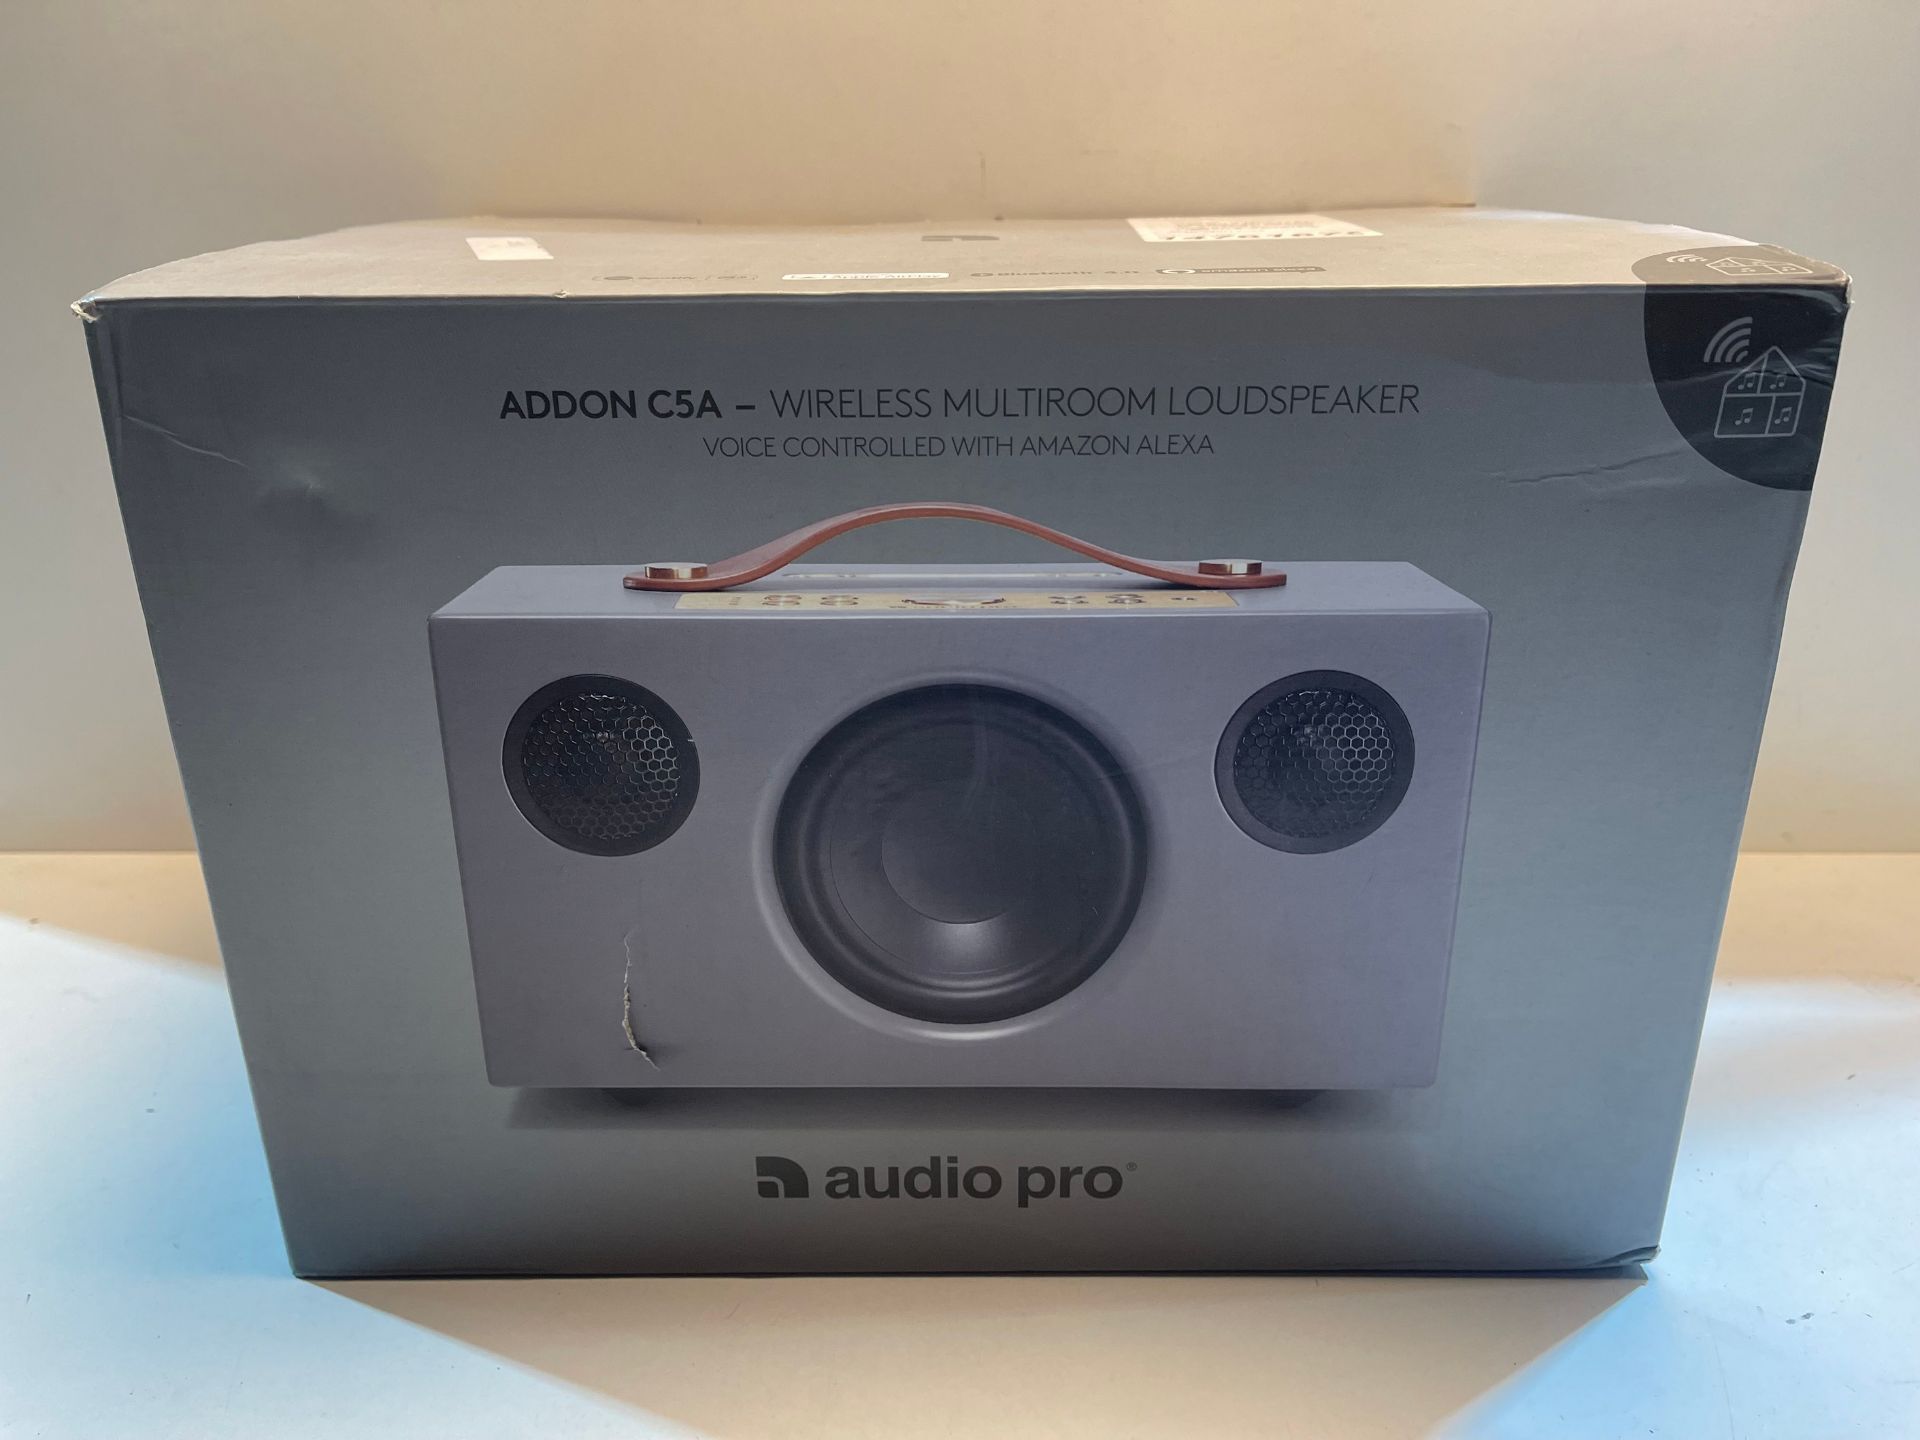 Audio Pro Addon C5A with Alexa built-in, Wireless, Bluetooth, Smart Speaker with Multi-room –